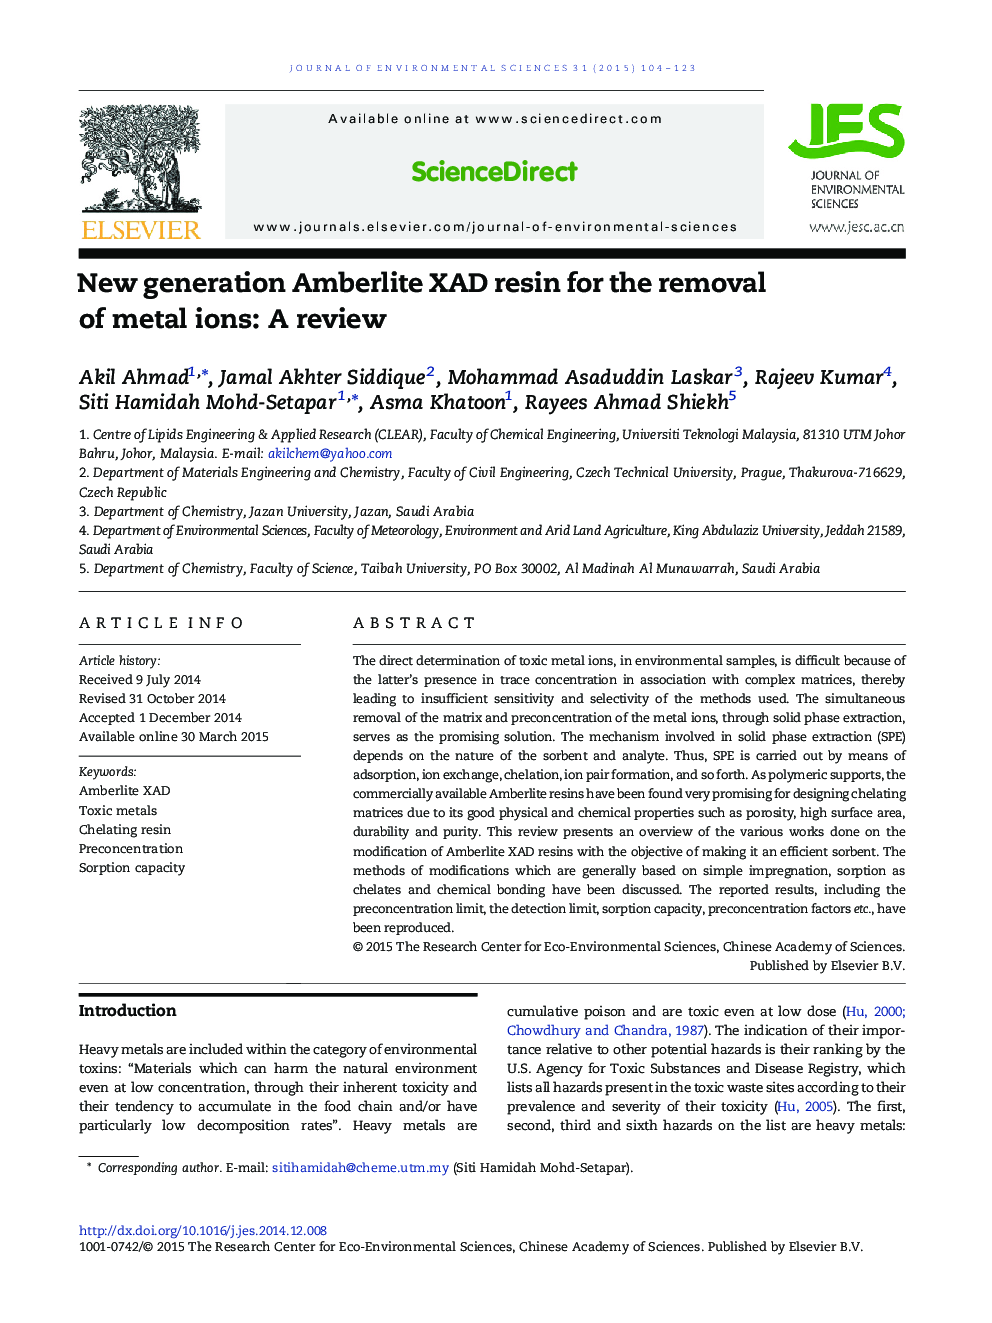 New generation Amberlite XAD resin for the removal of metal ions: A review